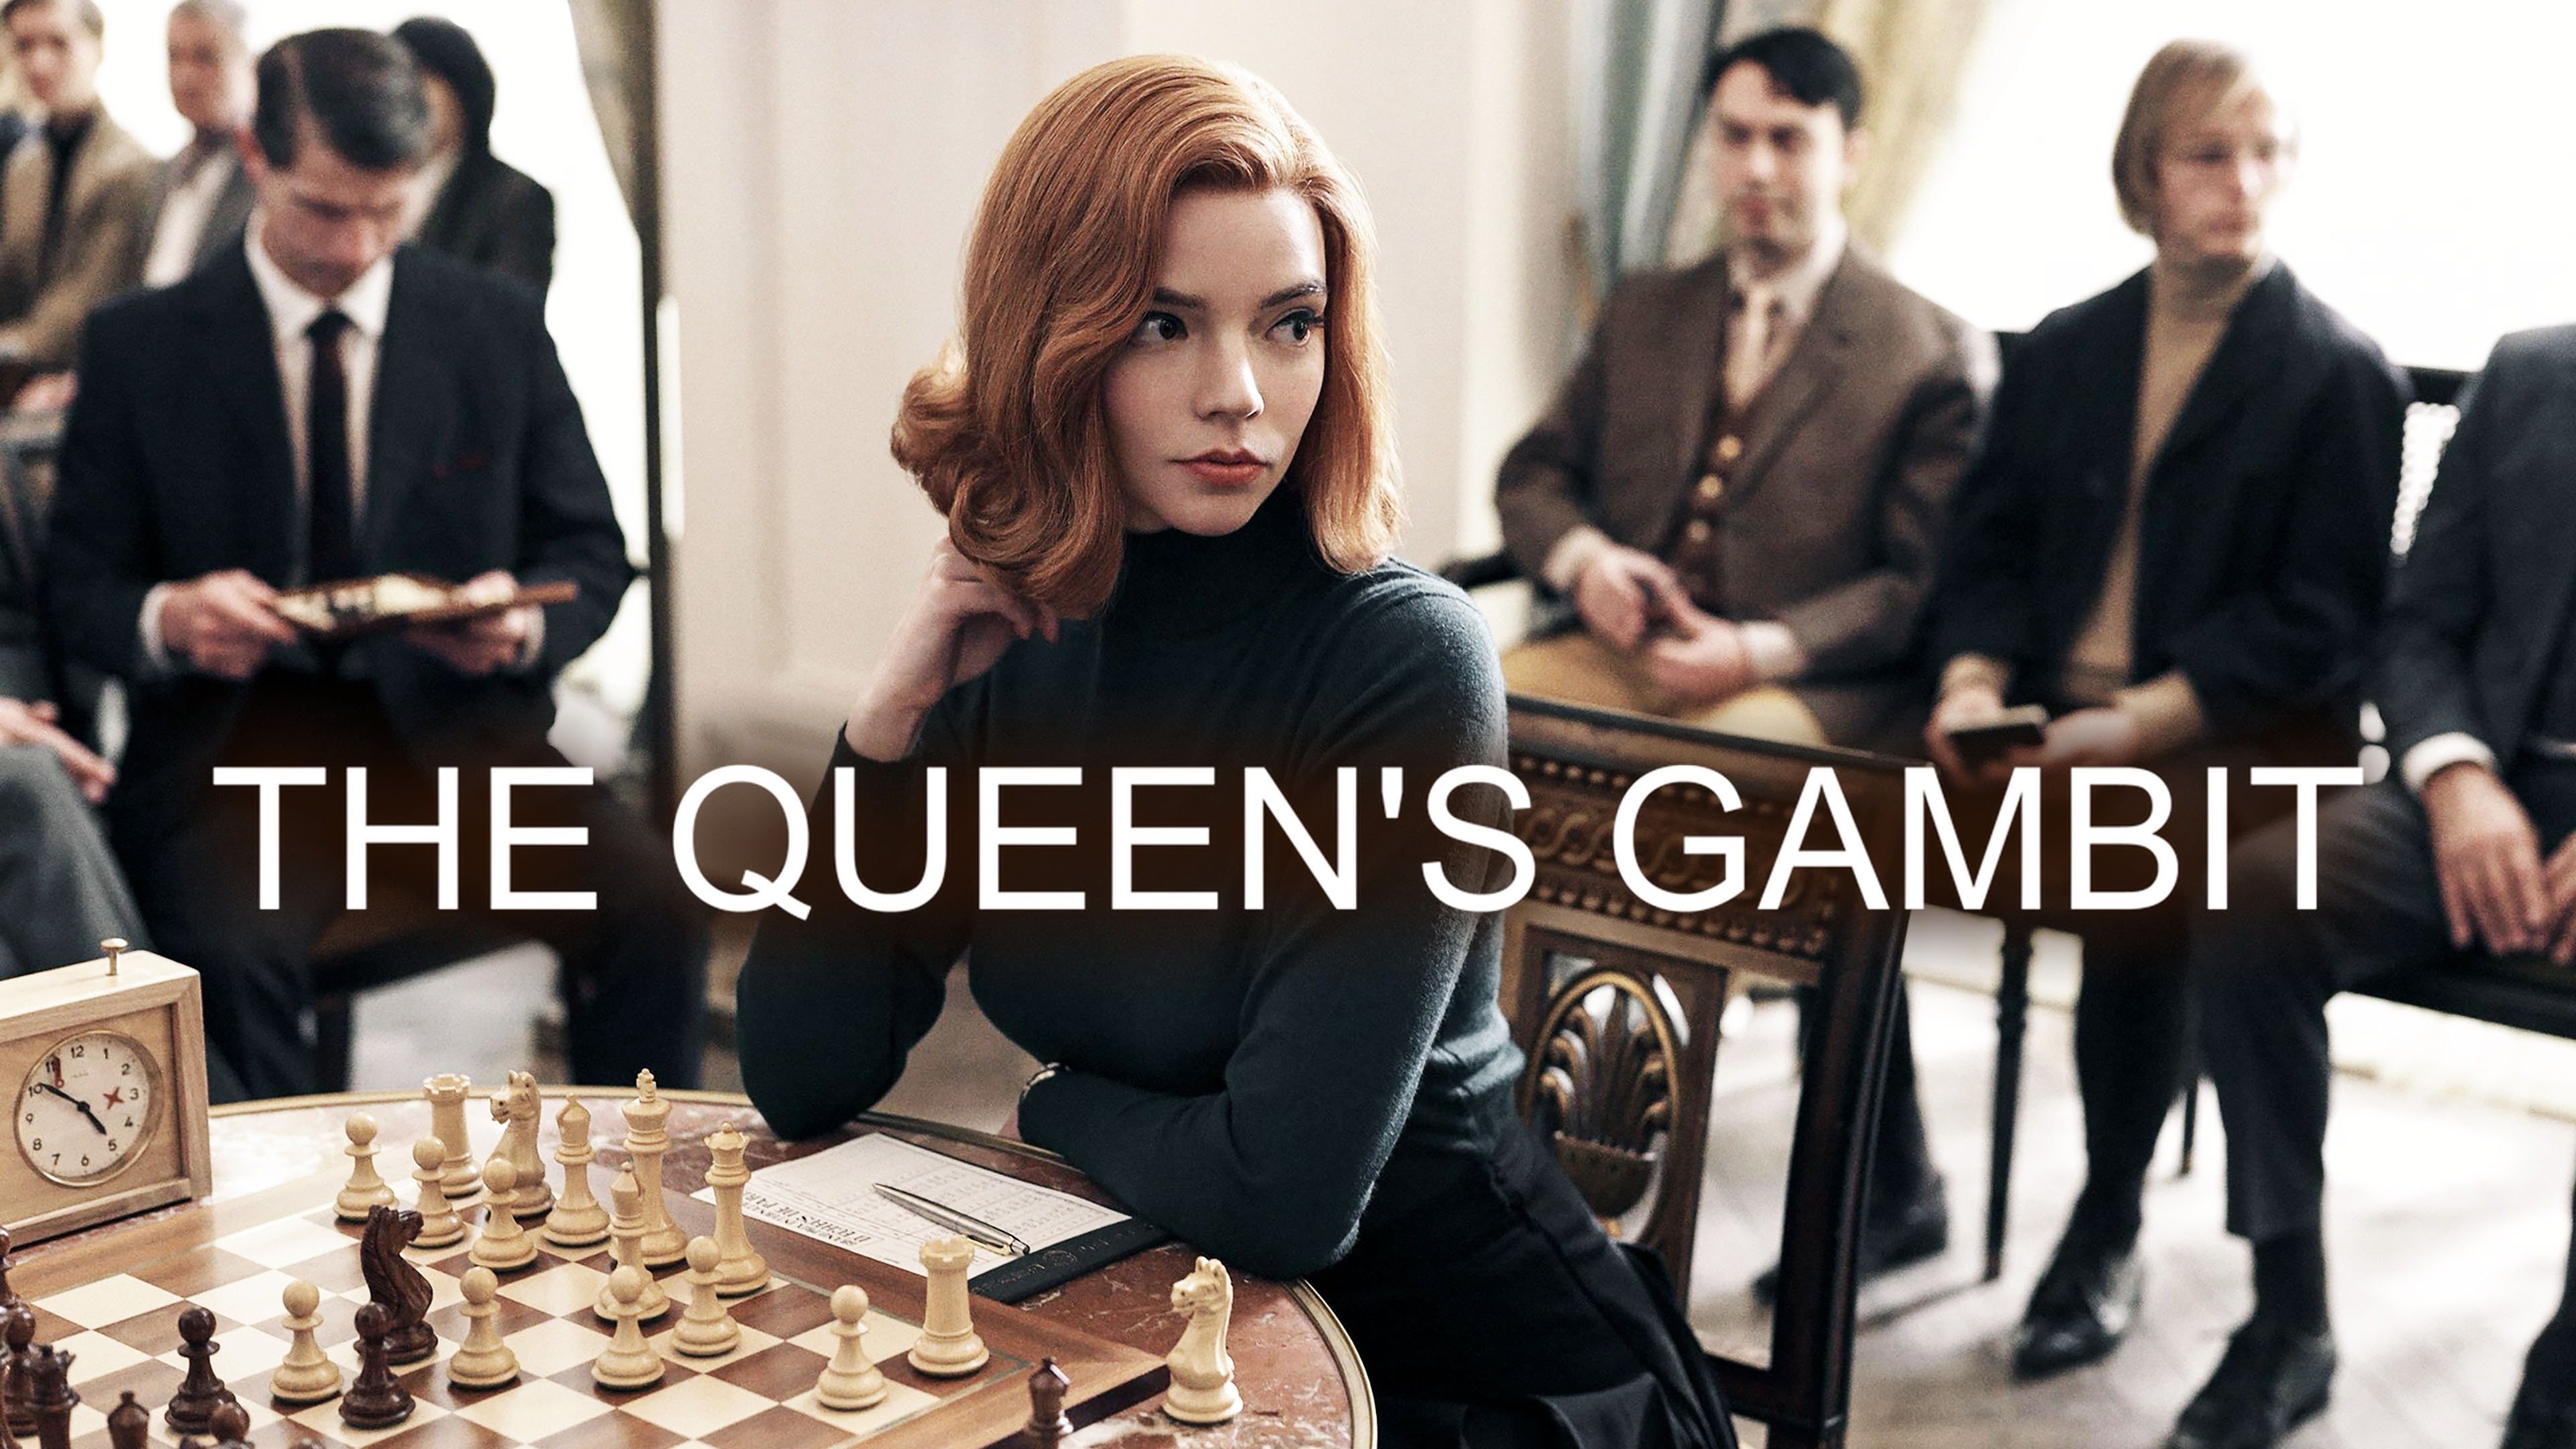 Rotten Tomatoes - 'The Queen's Gambit' was watched by a